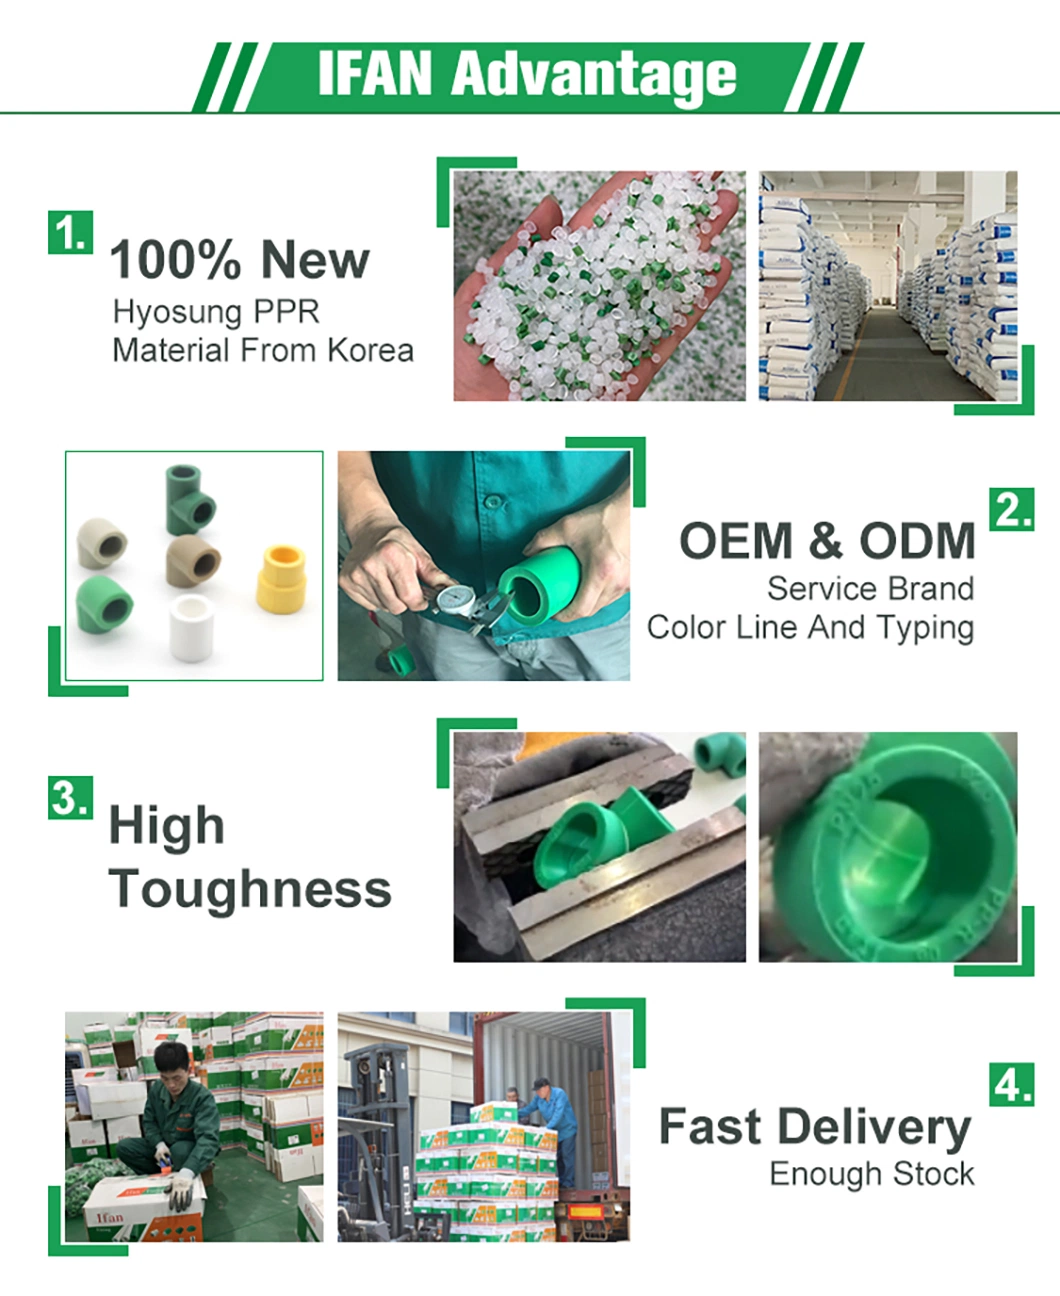 Ifan Green Color PPR Plastic Elbow Tube Plumbing Materials PPR Pipe Fittings